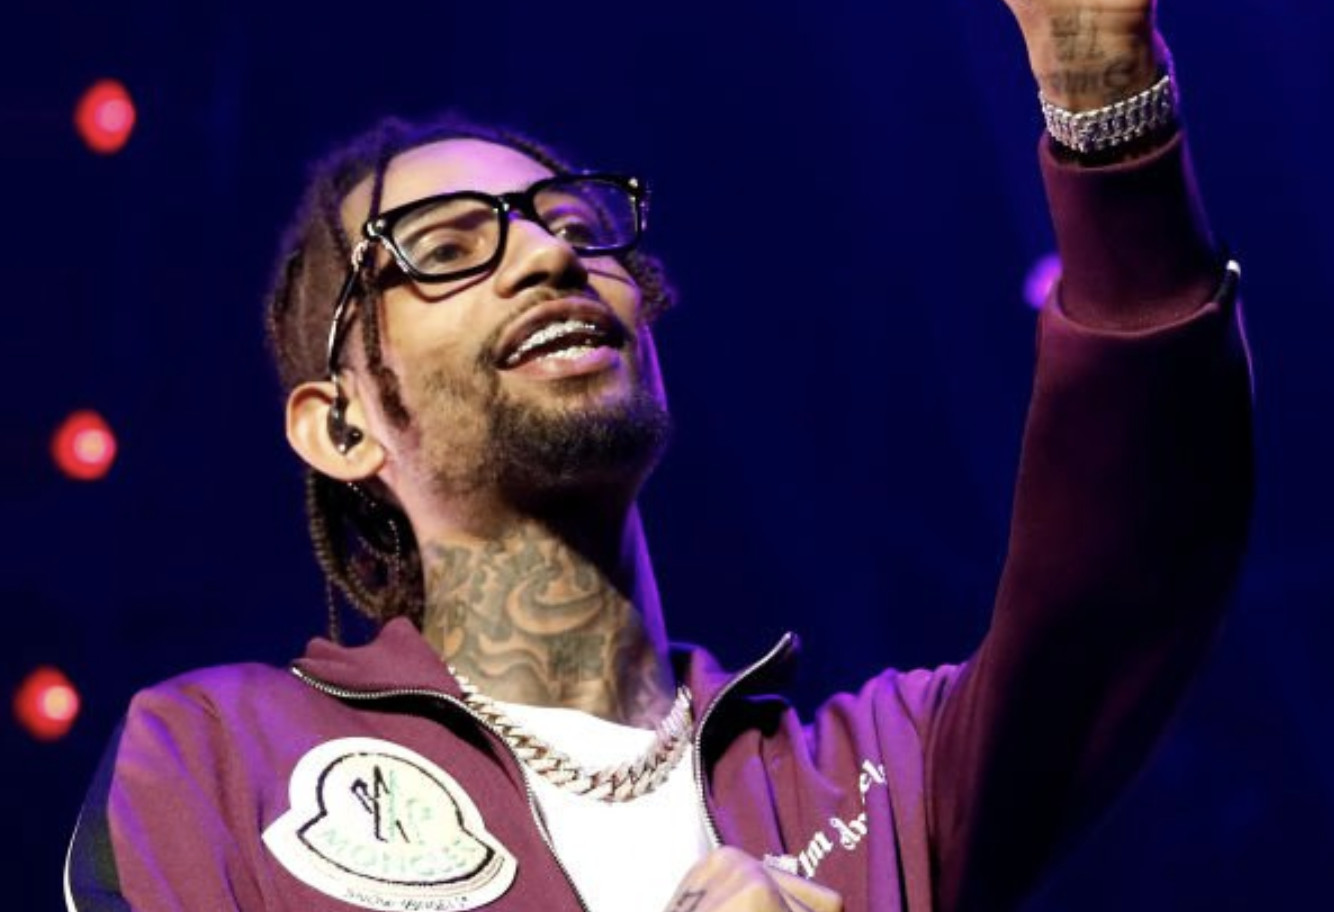 PNB Rock’s Brother PNB Meen Pens Heartbreaking Post: “I Can’t Stop Crying… I’m Shaking”